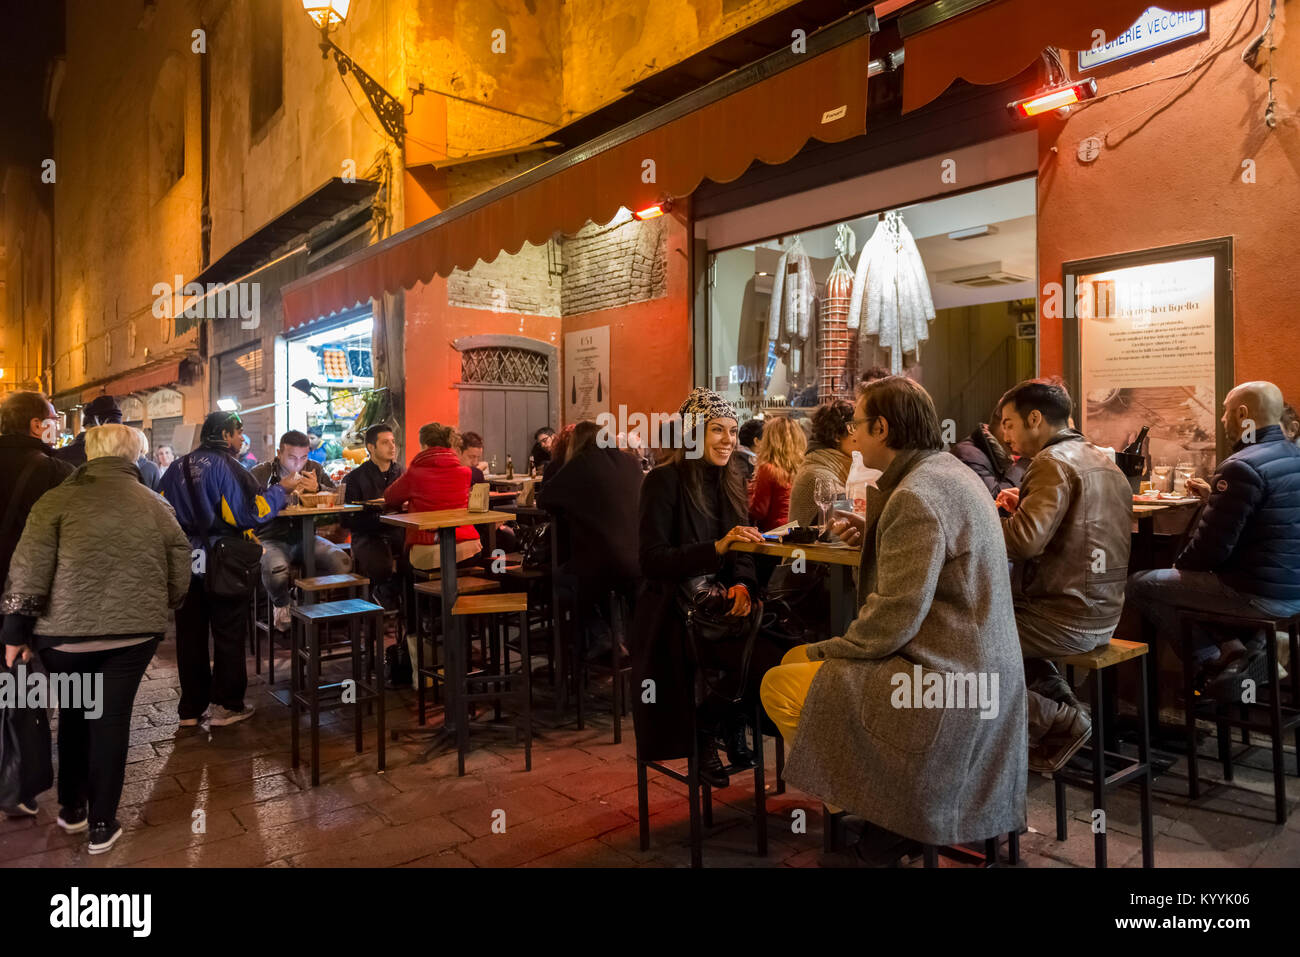 People sitting out eating in restaurants, cafes and bars in Via Pescherie Vecchie, a street in Bologna city, Italy at night Stock Photo